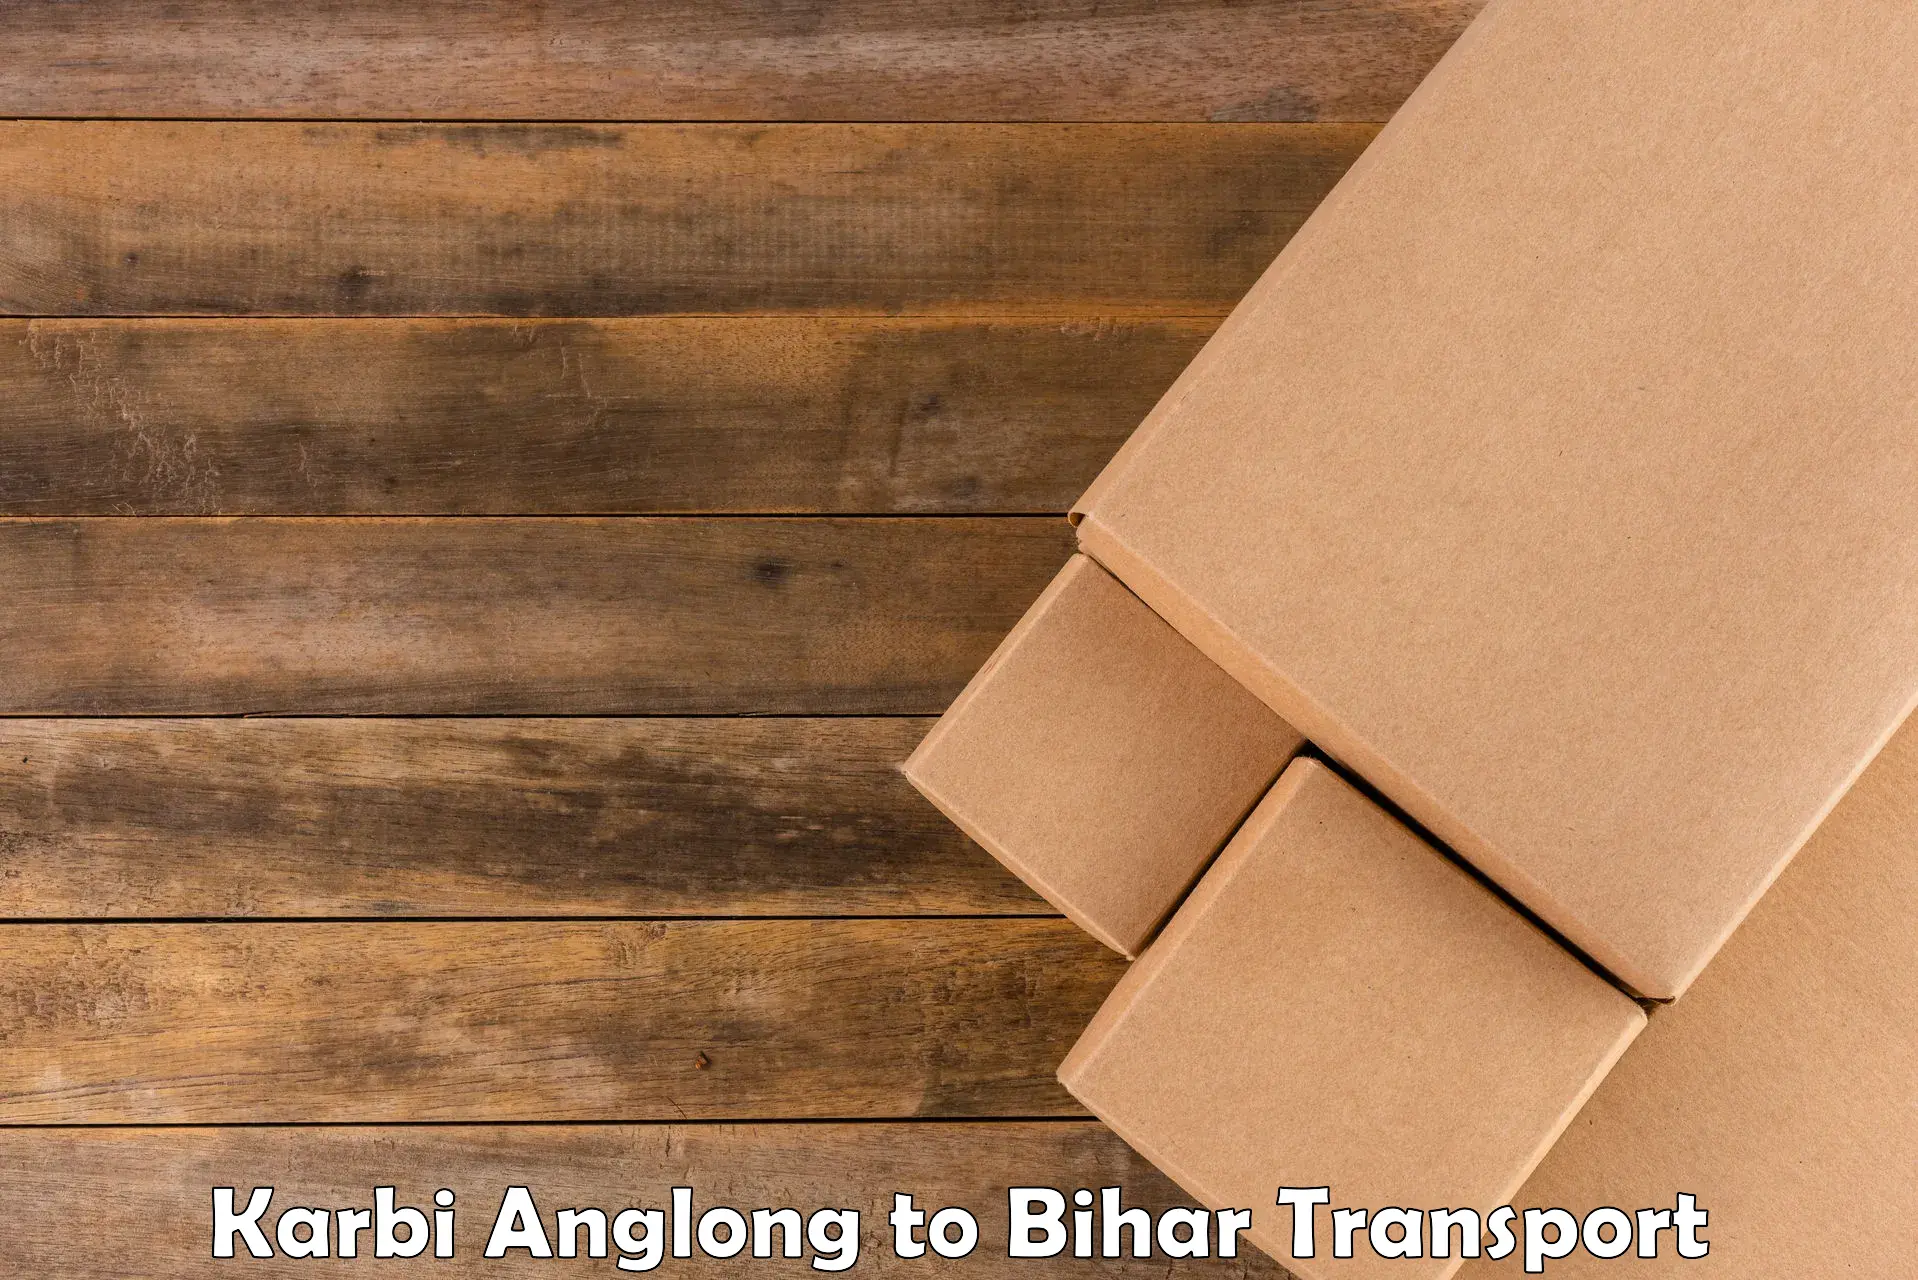 Transport bike from one state to another Karbi Anglong to Bihar